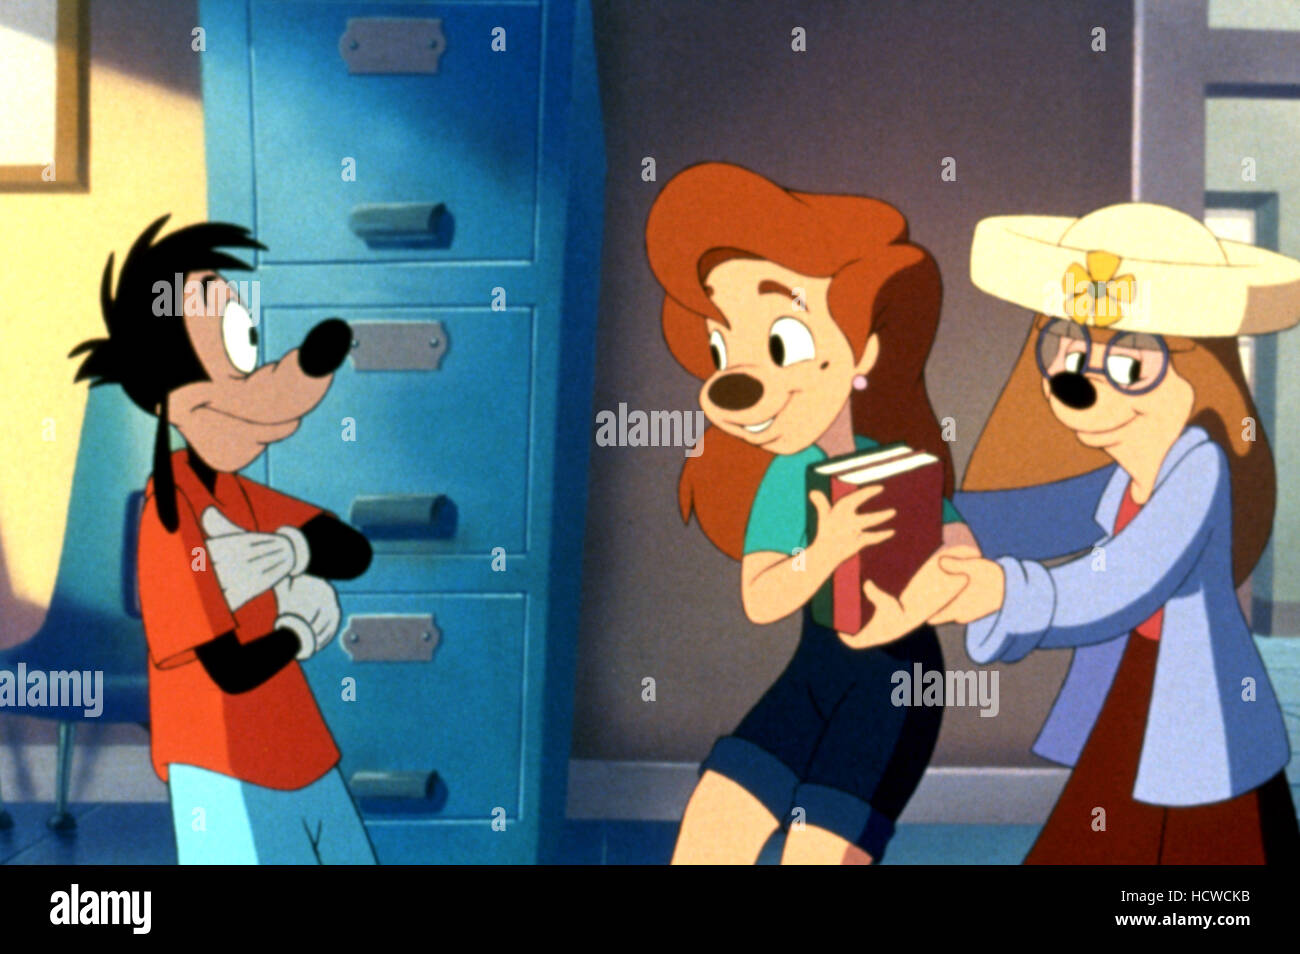 A goofy movie stacey